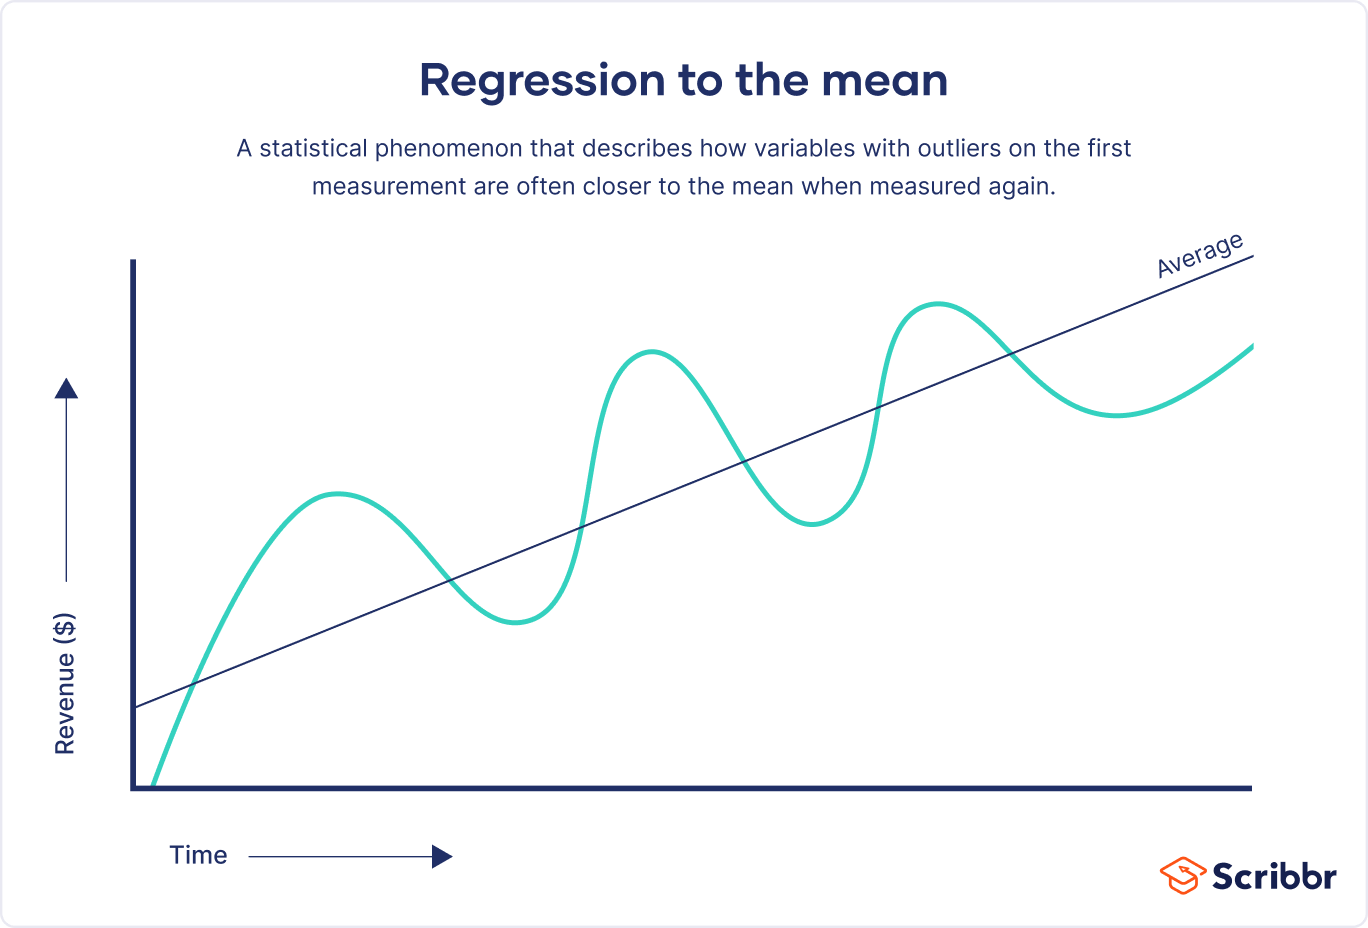 What is regression to the mean?